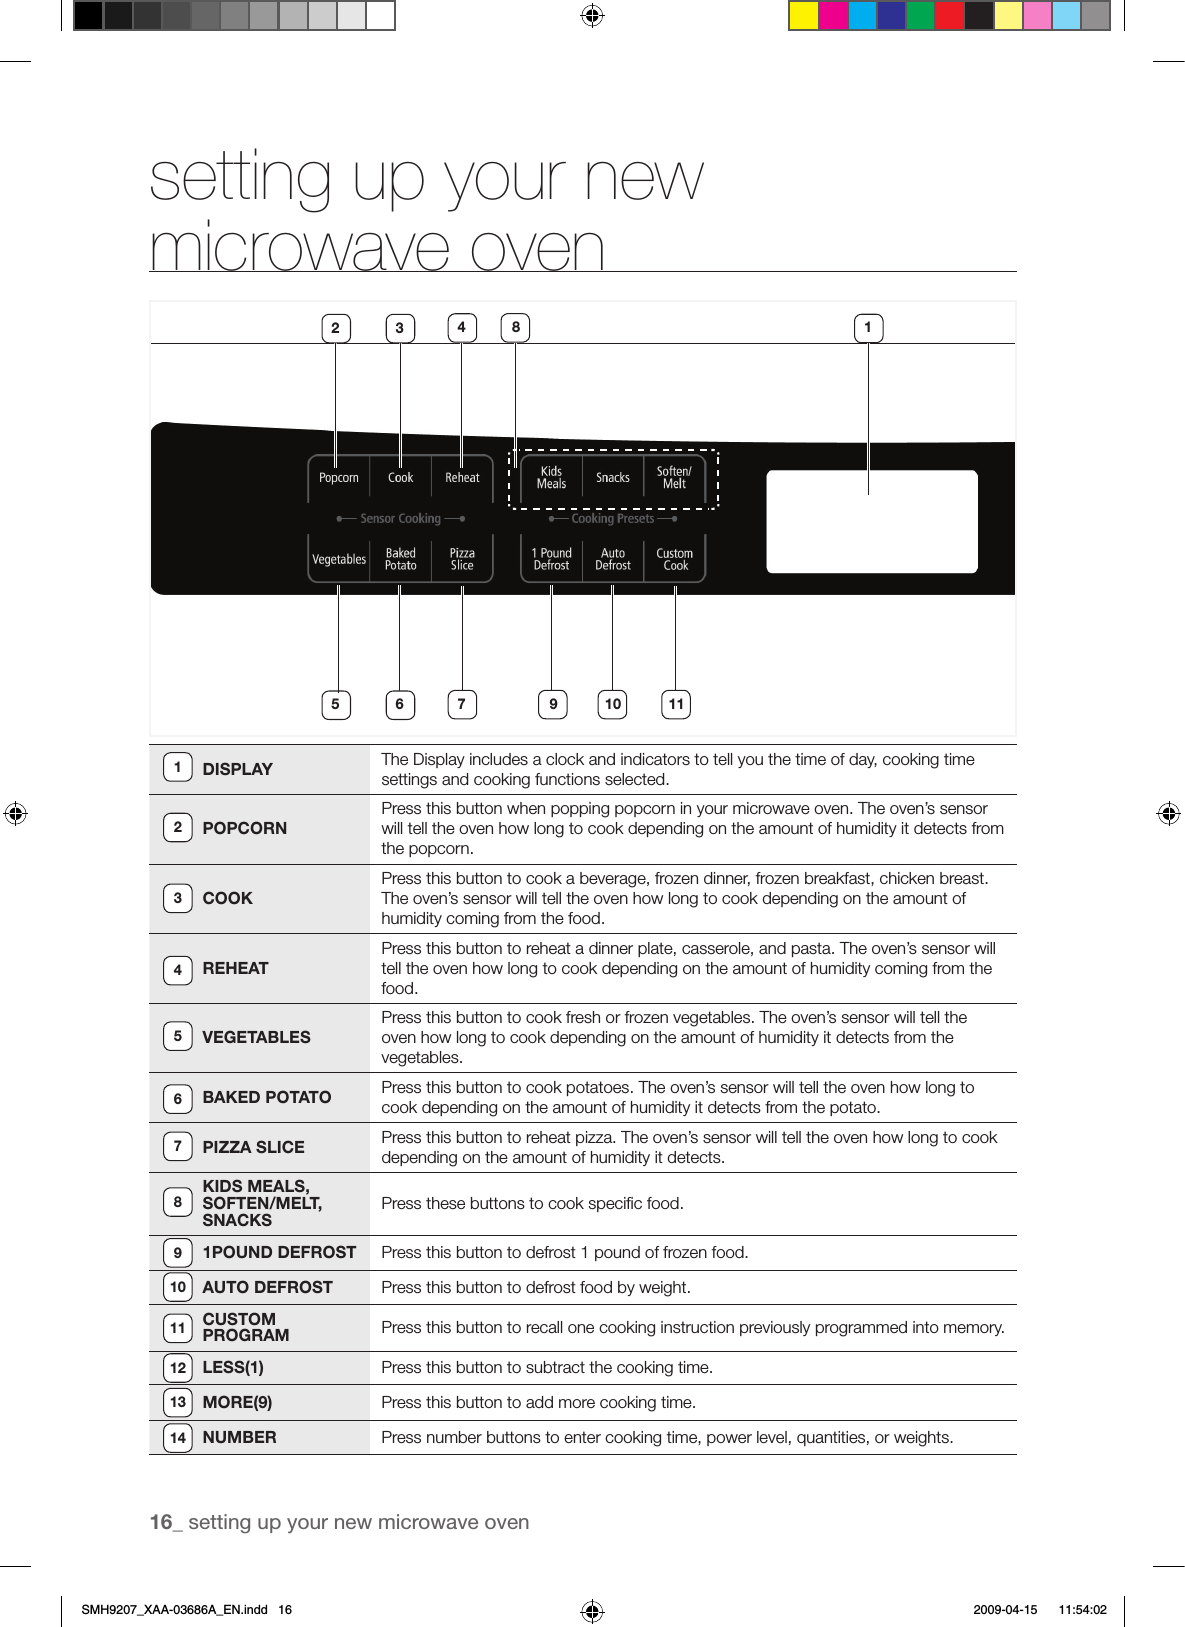 16_ setting up your new microwave oven setting up your new microwave oven1212348679 10 11 14 13 19 20 2215 16 17 18 215Timer Hi/Lo/OffDelay OffLightVentHi/Mid/Lo/Off23 2425 26DISPLAY The Display includes a clock and indicators to tell you the time of day, cooking time settings and cooking functions selected.POPCORNPress this button when popping popcorn in your microwave oven. The oven’s sensor will tell the oven how long to cook depending on the amount of humidity it detects from the popcorn.COOKPress this button to cook a beverage, frozen dinner, frozen breakfast, chicken breast. The oven’s sensor will tell the oven how long to cook depending on the amount of humidity coming from the food.REHEATPress this button to reheat a dinner plate, casserole, and pasta. The oven’s sensor will tell the oven how long to cook depending on the amount of humidity coming from the food.VEGETABLESPress this button to cook fresh or frozen vegetables. The oven’s sensor will tell the oven how long to cook depending on the amount of humidity it detects from the vegetables.BAKED POTATO Press this button to cook potatoes. The oven’s sensor will tell the oven how long to cook depending on the amount of humidity it detects from the potato.PIZZA SLICE Press this button to reheat pizza. The oven’s sensor will tell the oven how long to cook depending on the amount of humidity it detects.KIDS MEALS, SOFTEN/MELT, SNACKSPress these buttons to cook speciﬁc food.1POUND DEFROST Press this button to defrost 1 pound of frozen food.AUTO DEFROST Press this button to defrost food by weight.CUSTOM PROGRAM Press this button to recall one cooking instruction previously programmed into memory.LESS(1) Press this button to subtract the cooking time.MORE(9) Press this button to add more cooking time.NUMBER Press number buttons to enter cooking time, power level, quantities, or weights.1234567891011121314SMH9207_XAA-03686A_EN.indd   16 2009-04-15    11:54:02